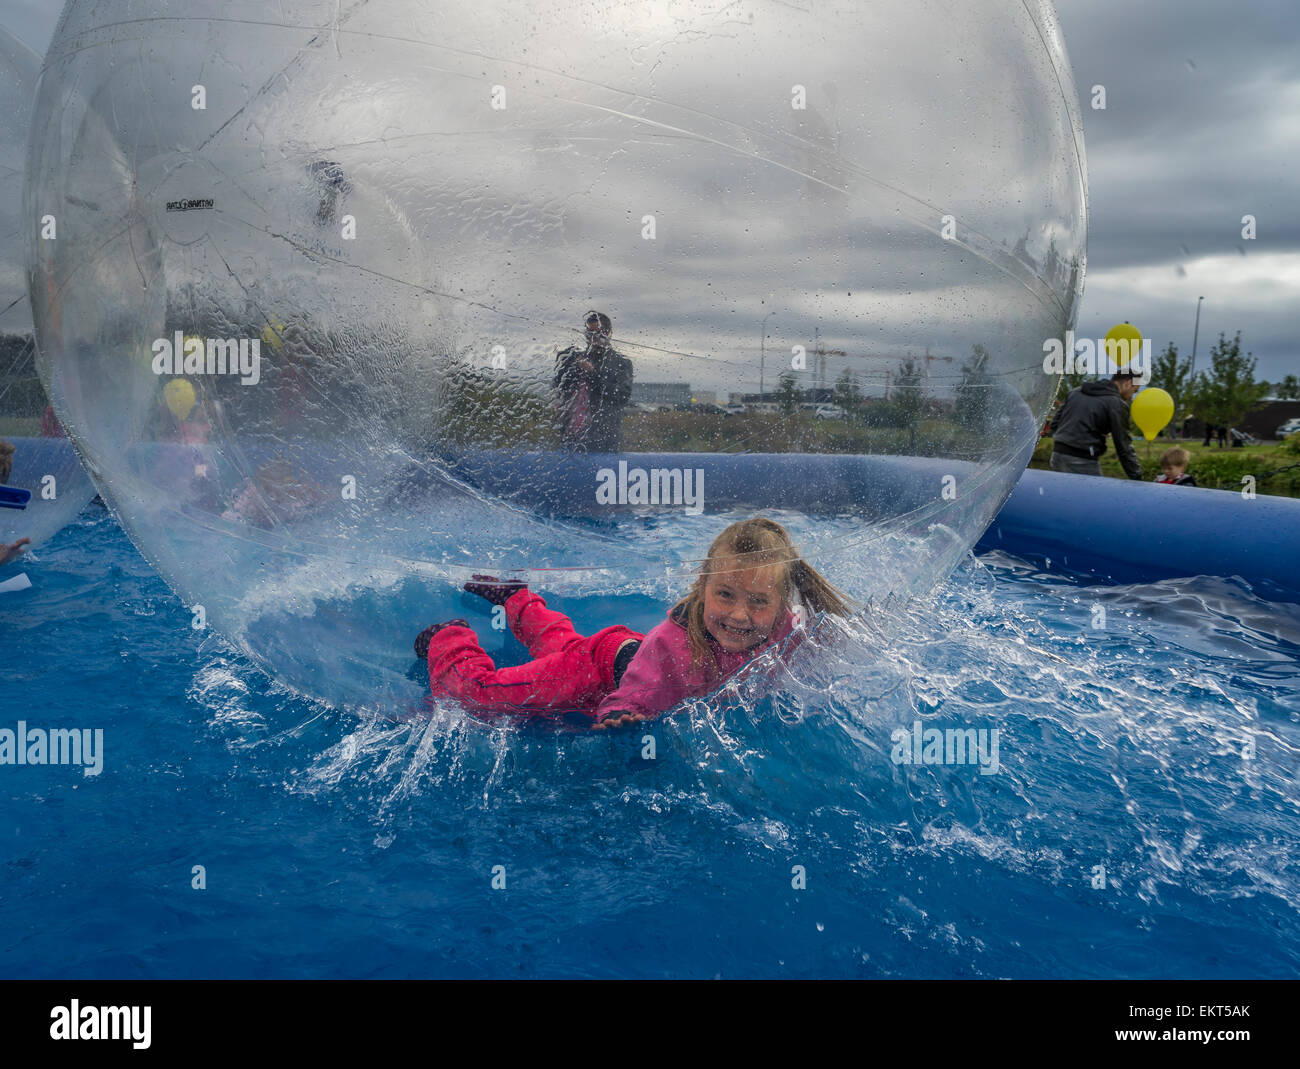 Young girl in a giant see-through inflatable sphere known as 'water walking balls', summer festival, Reykjavik, Iceland Stock Photo